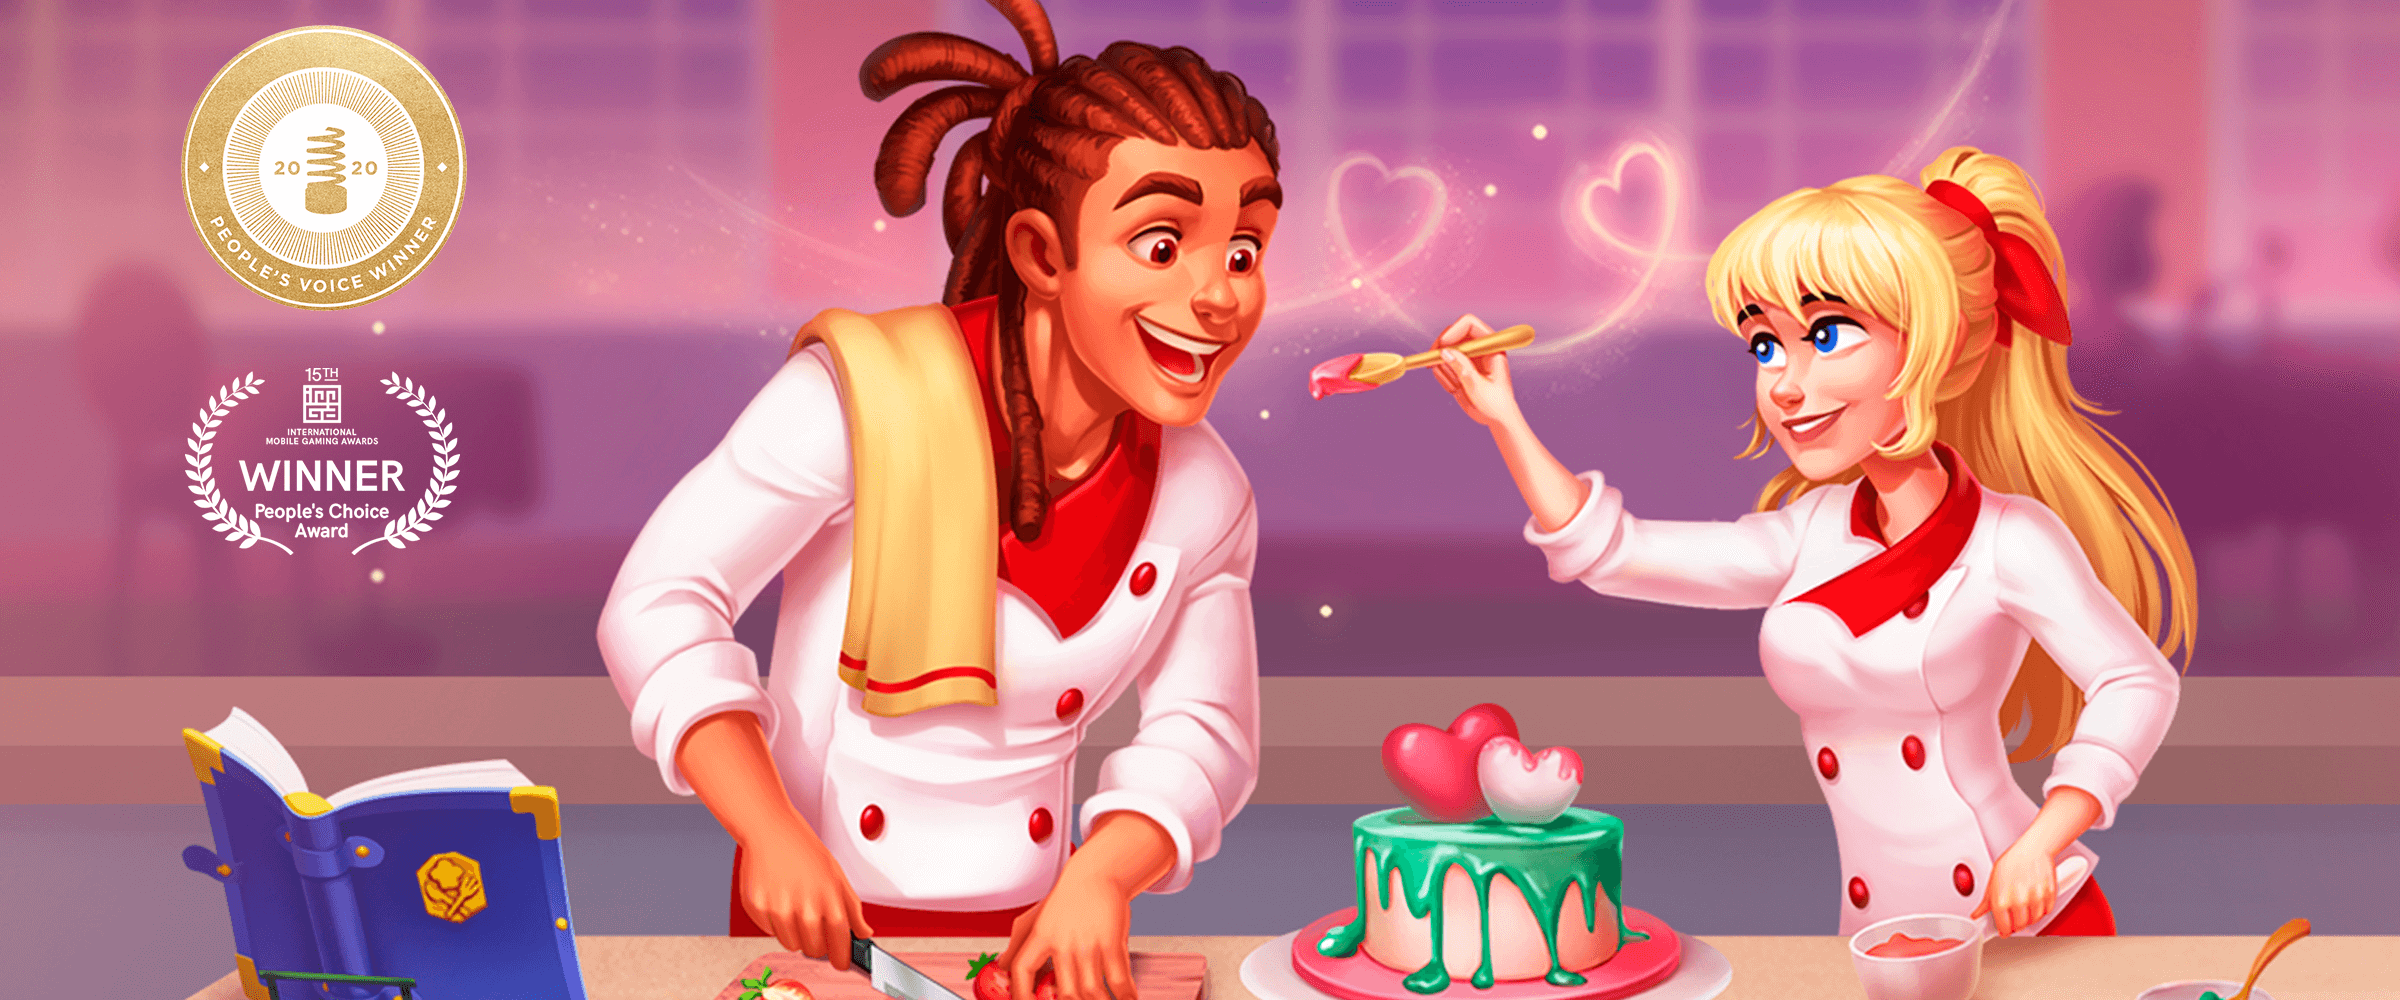 Cooking Diary v2.7.0 MOD APK + OBB (Unlimited Money, Voucher, Credits) Download